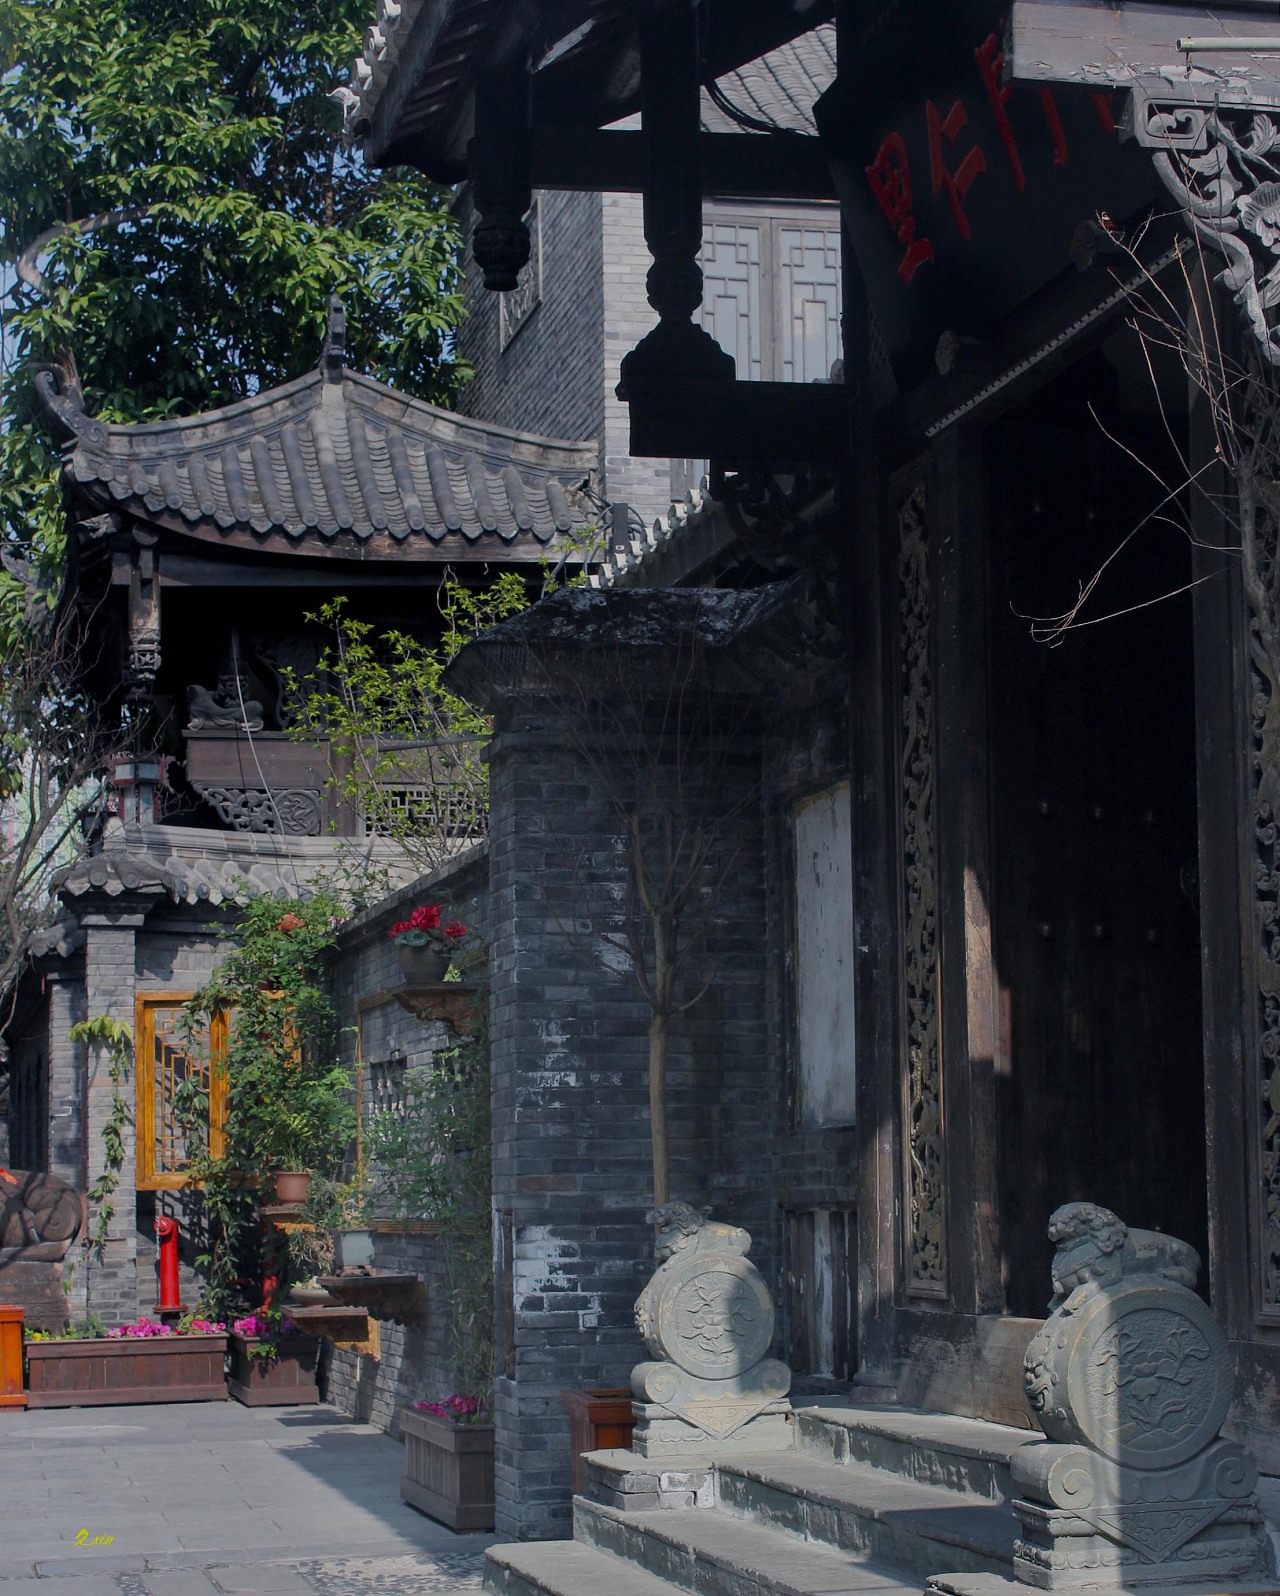 Kuanzhai Alley in Chengdu | Wide & Narrow Alley | Popular Attractions ...